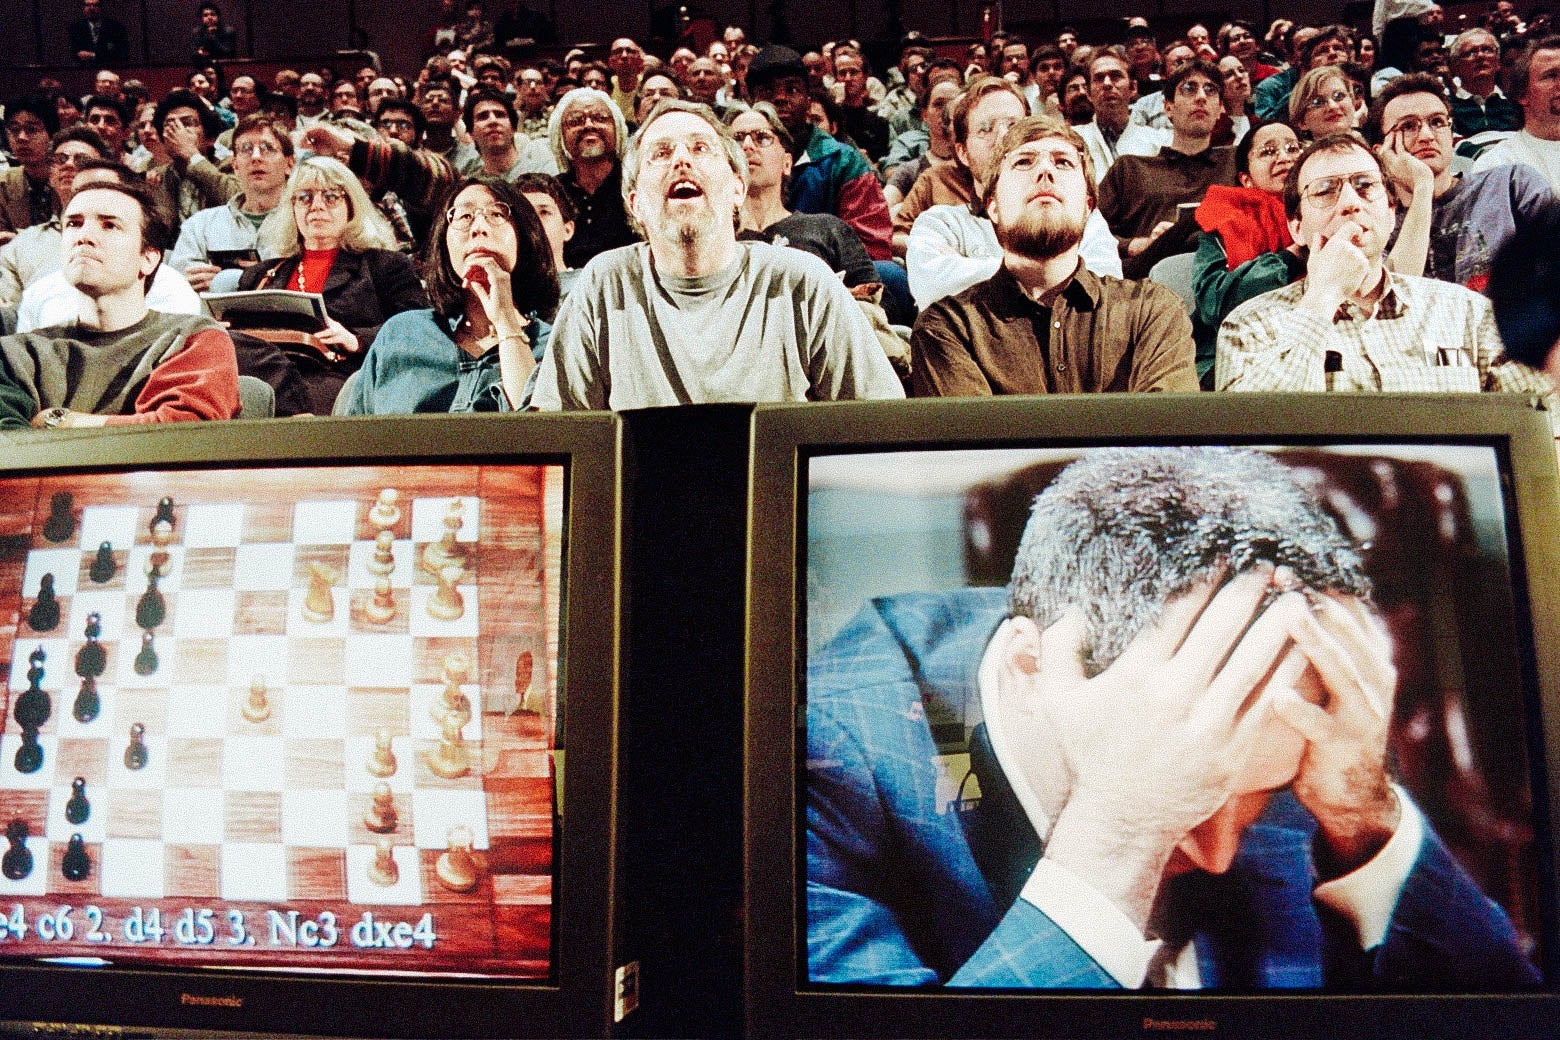 Two TV screens are seen below a sitting audience. The left screen shows a chessboard; the right shows Kasparov holding his head in his hands.